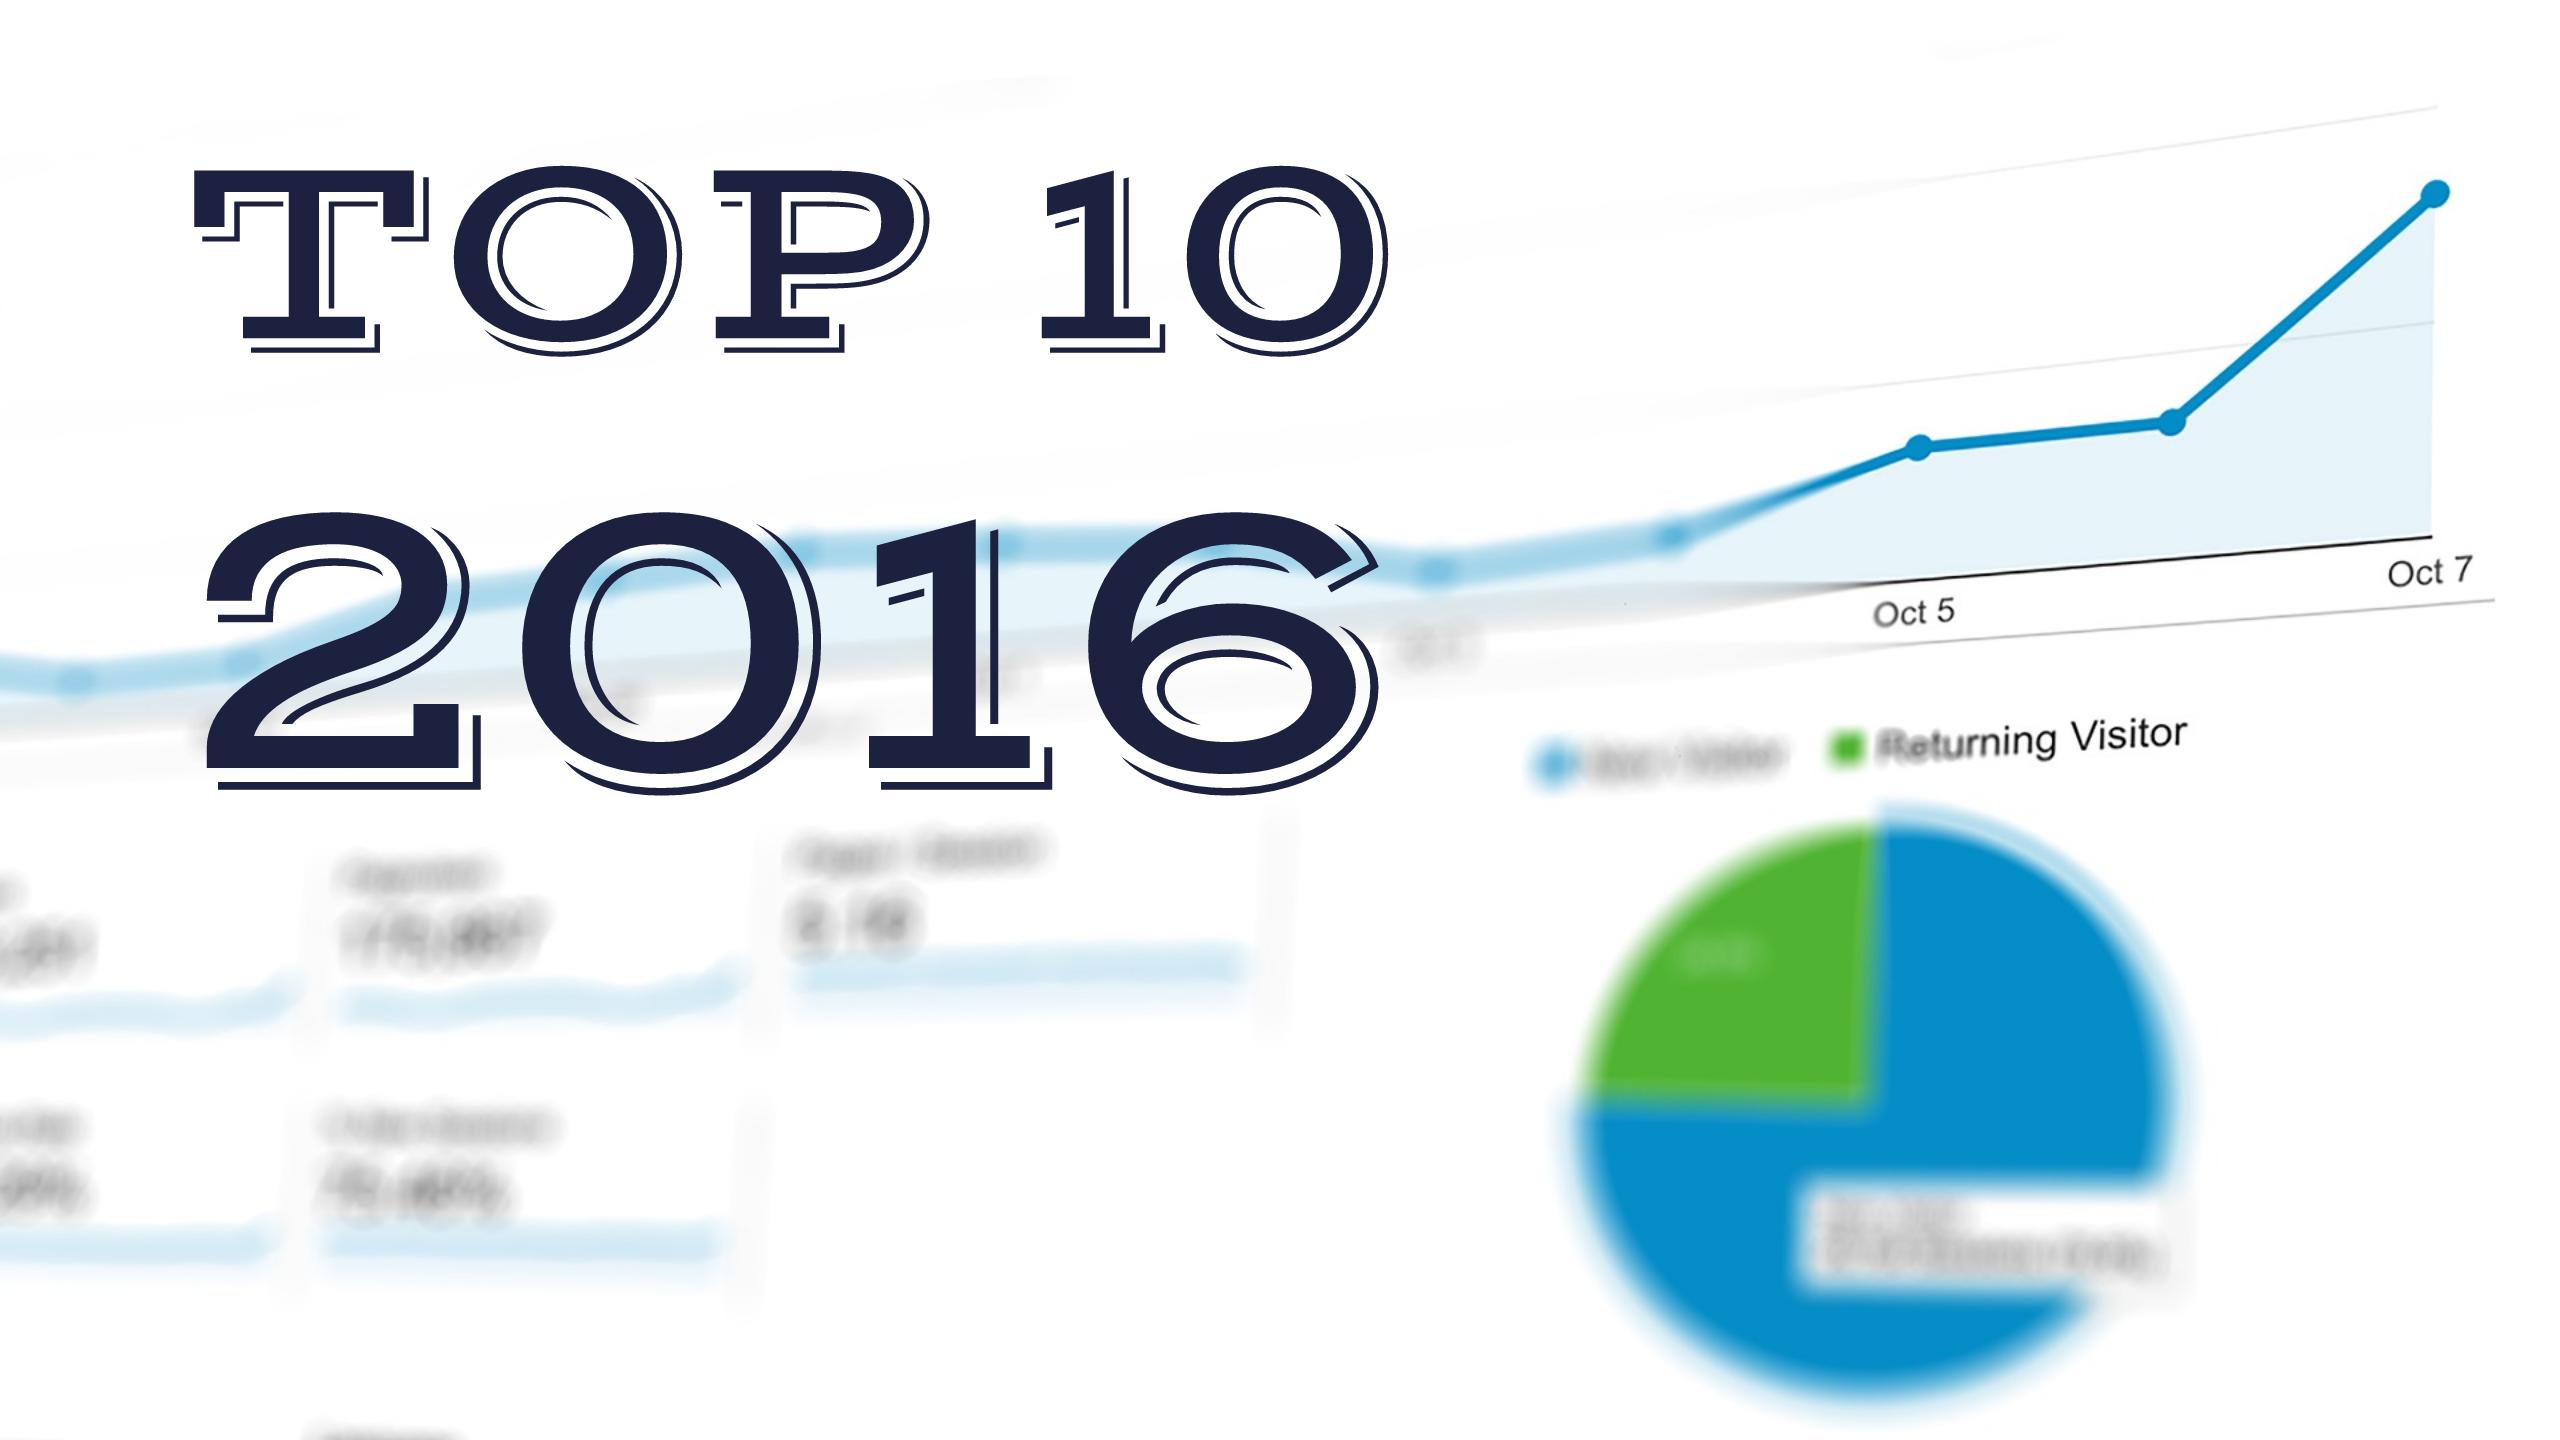 You are currently viewing Top 10 Artikel 2016